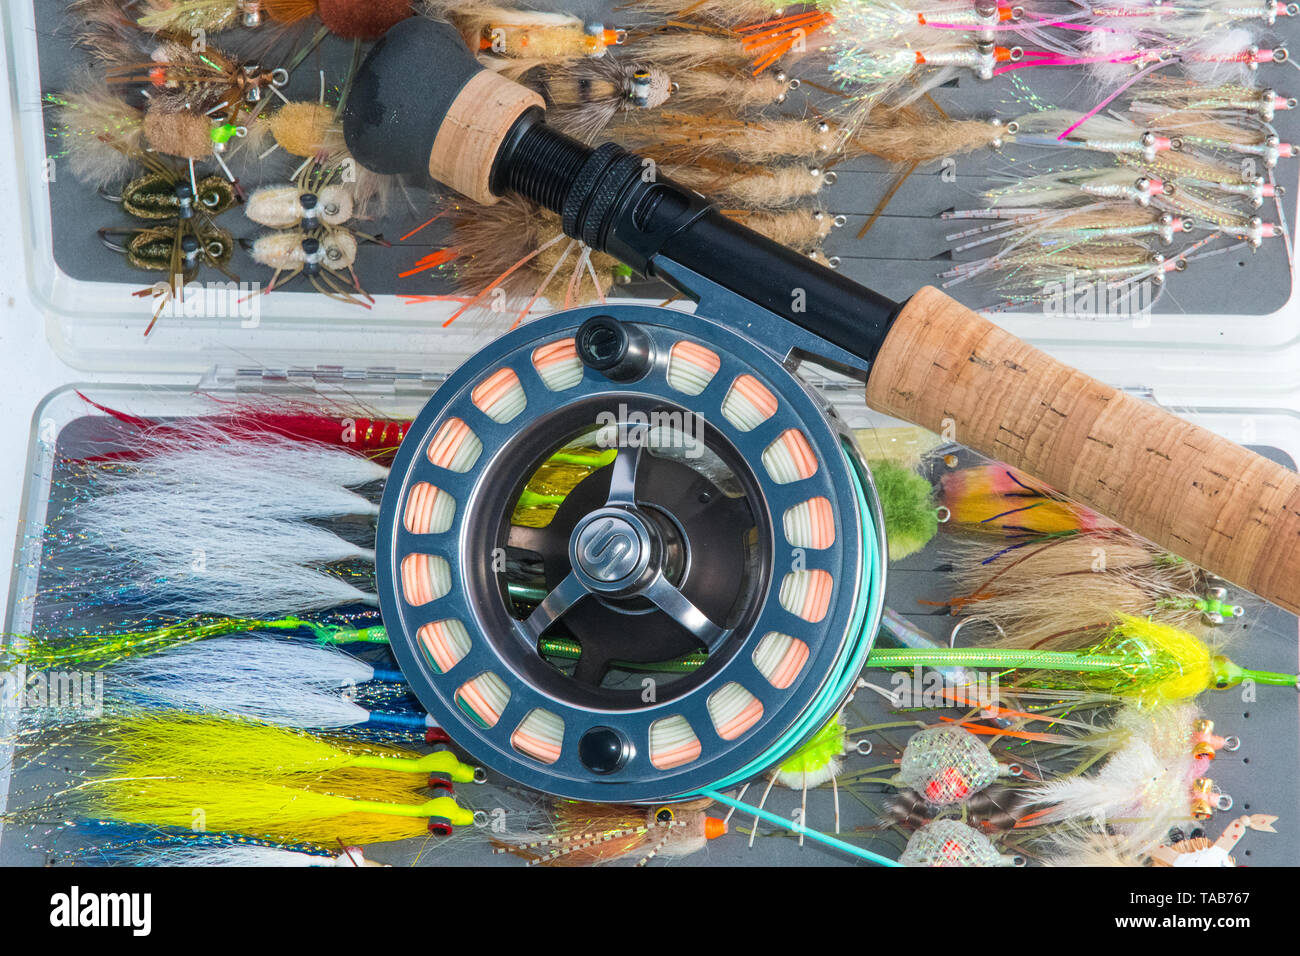 https://c8.alamy.com/comp/TAB767/saltwater-fly-fishing-flies-and-fly-rod-and-reel-TAB767.jpg